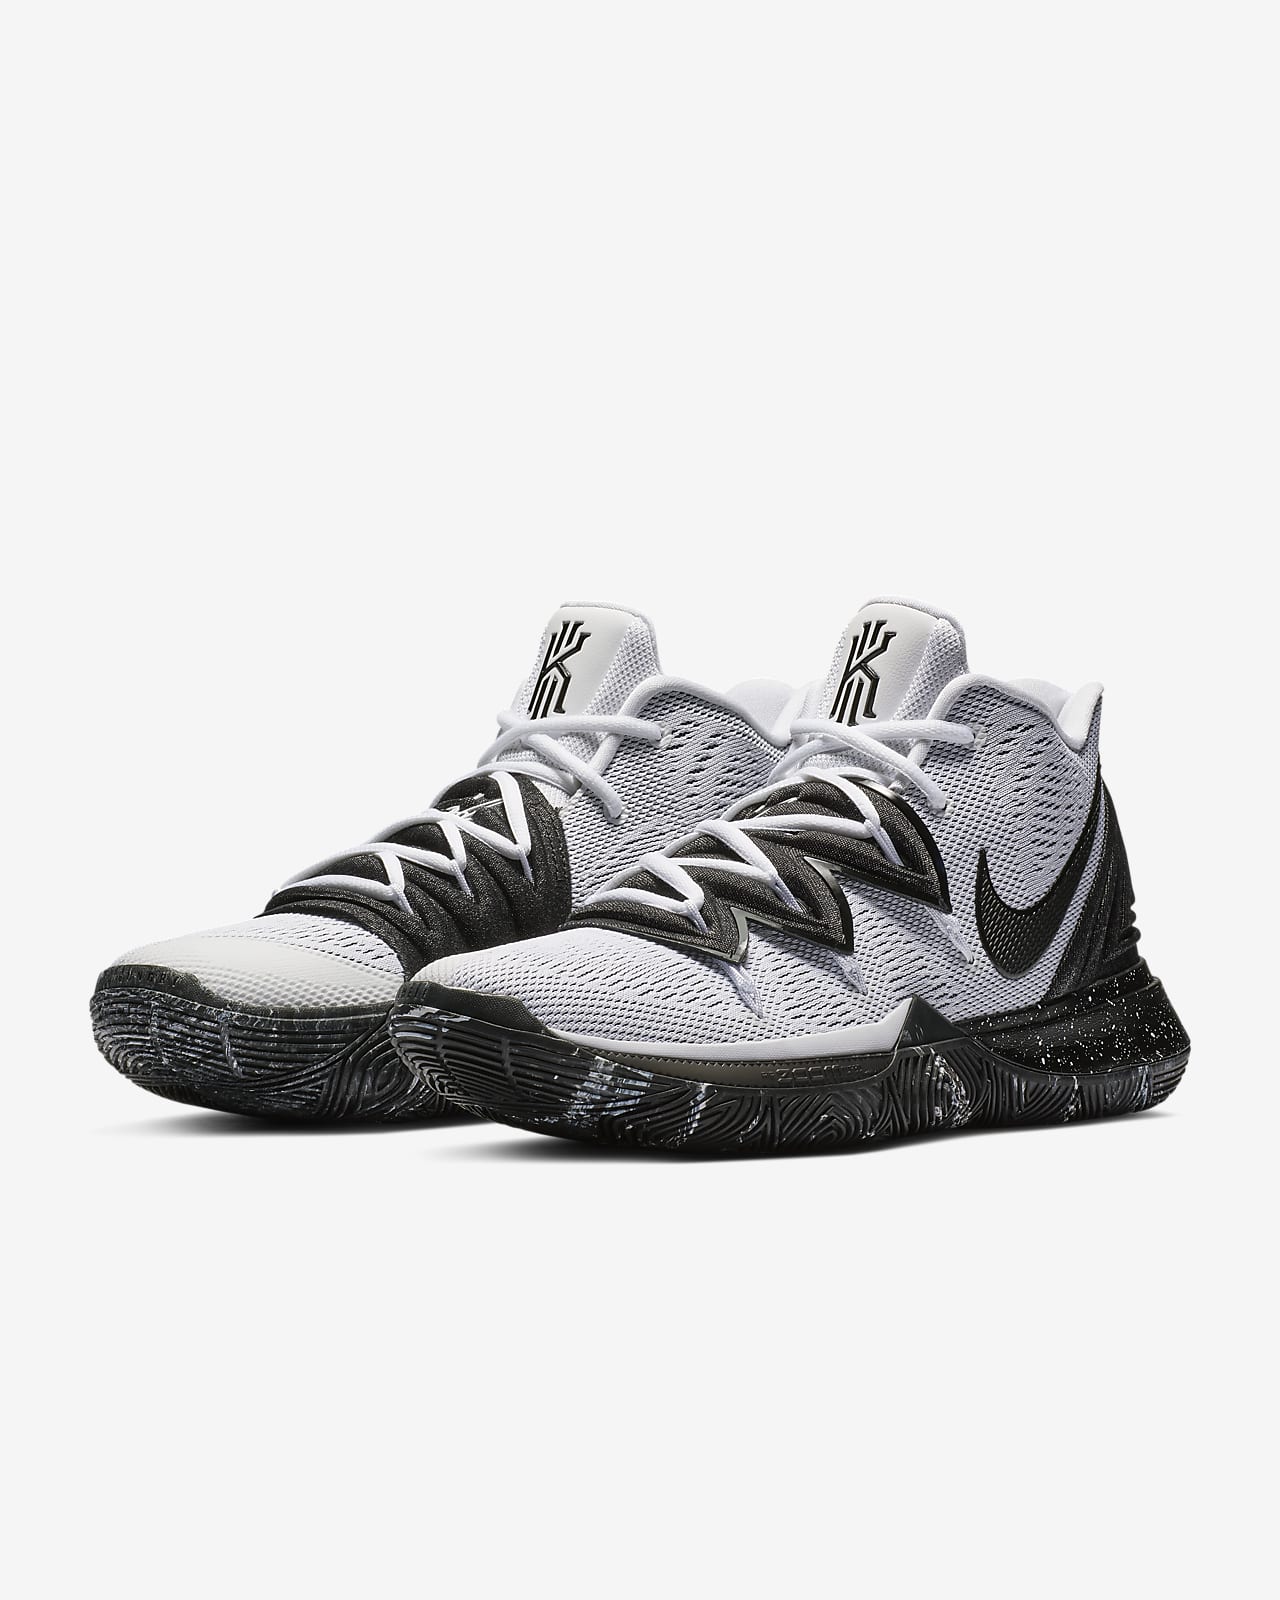 nike shoes kyrie 5 price